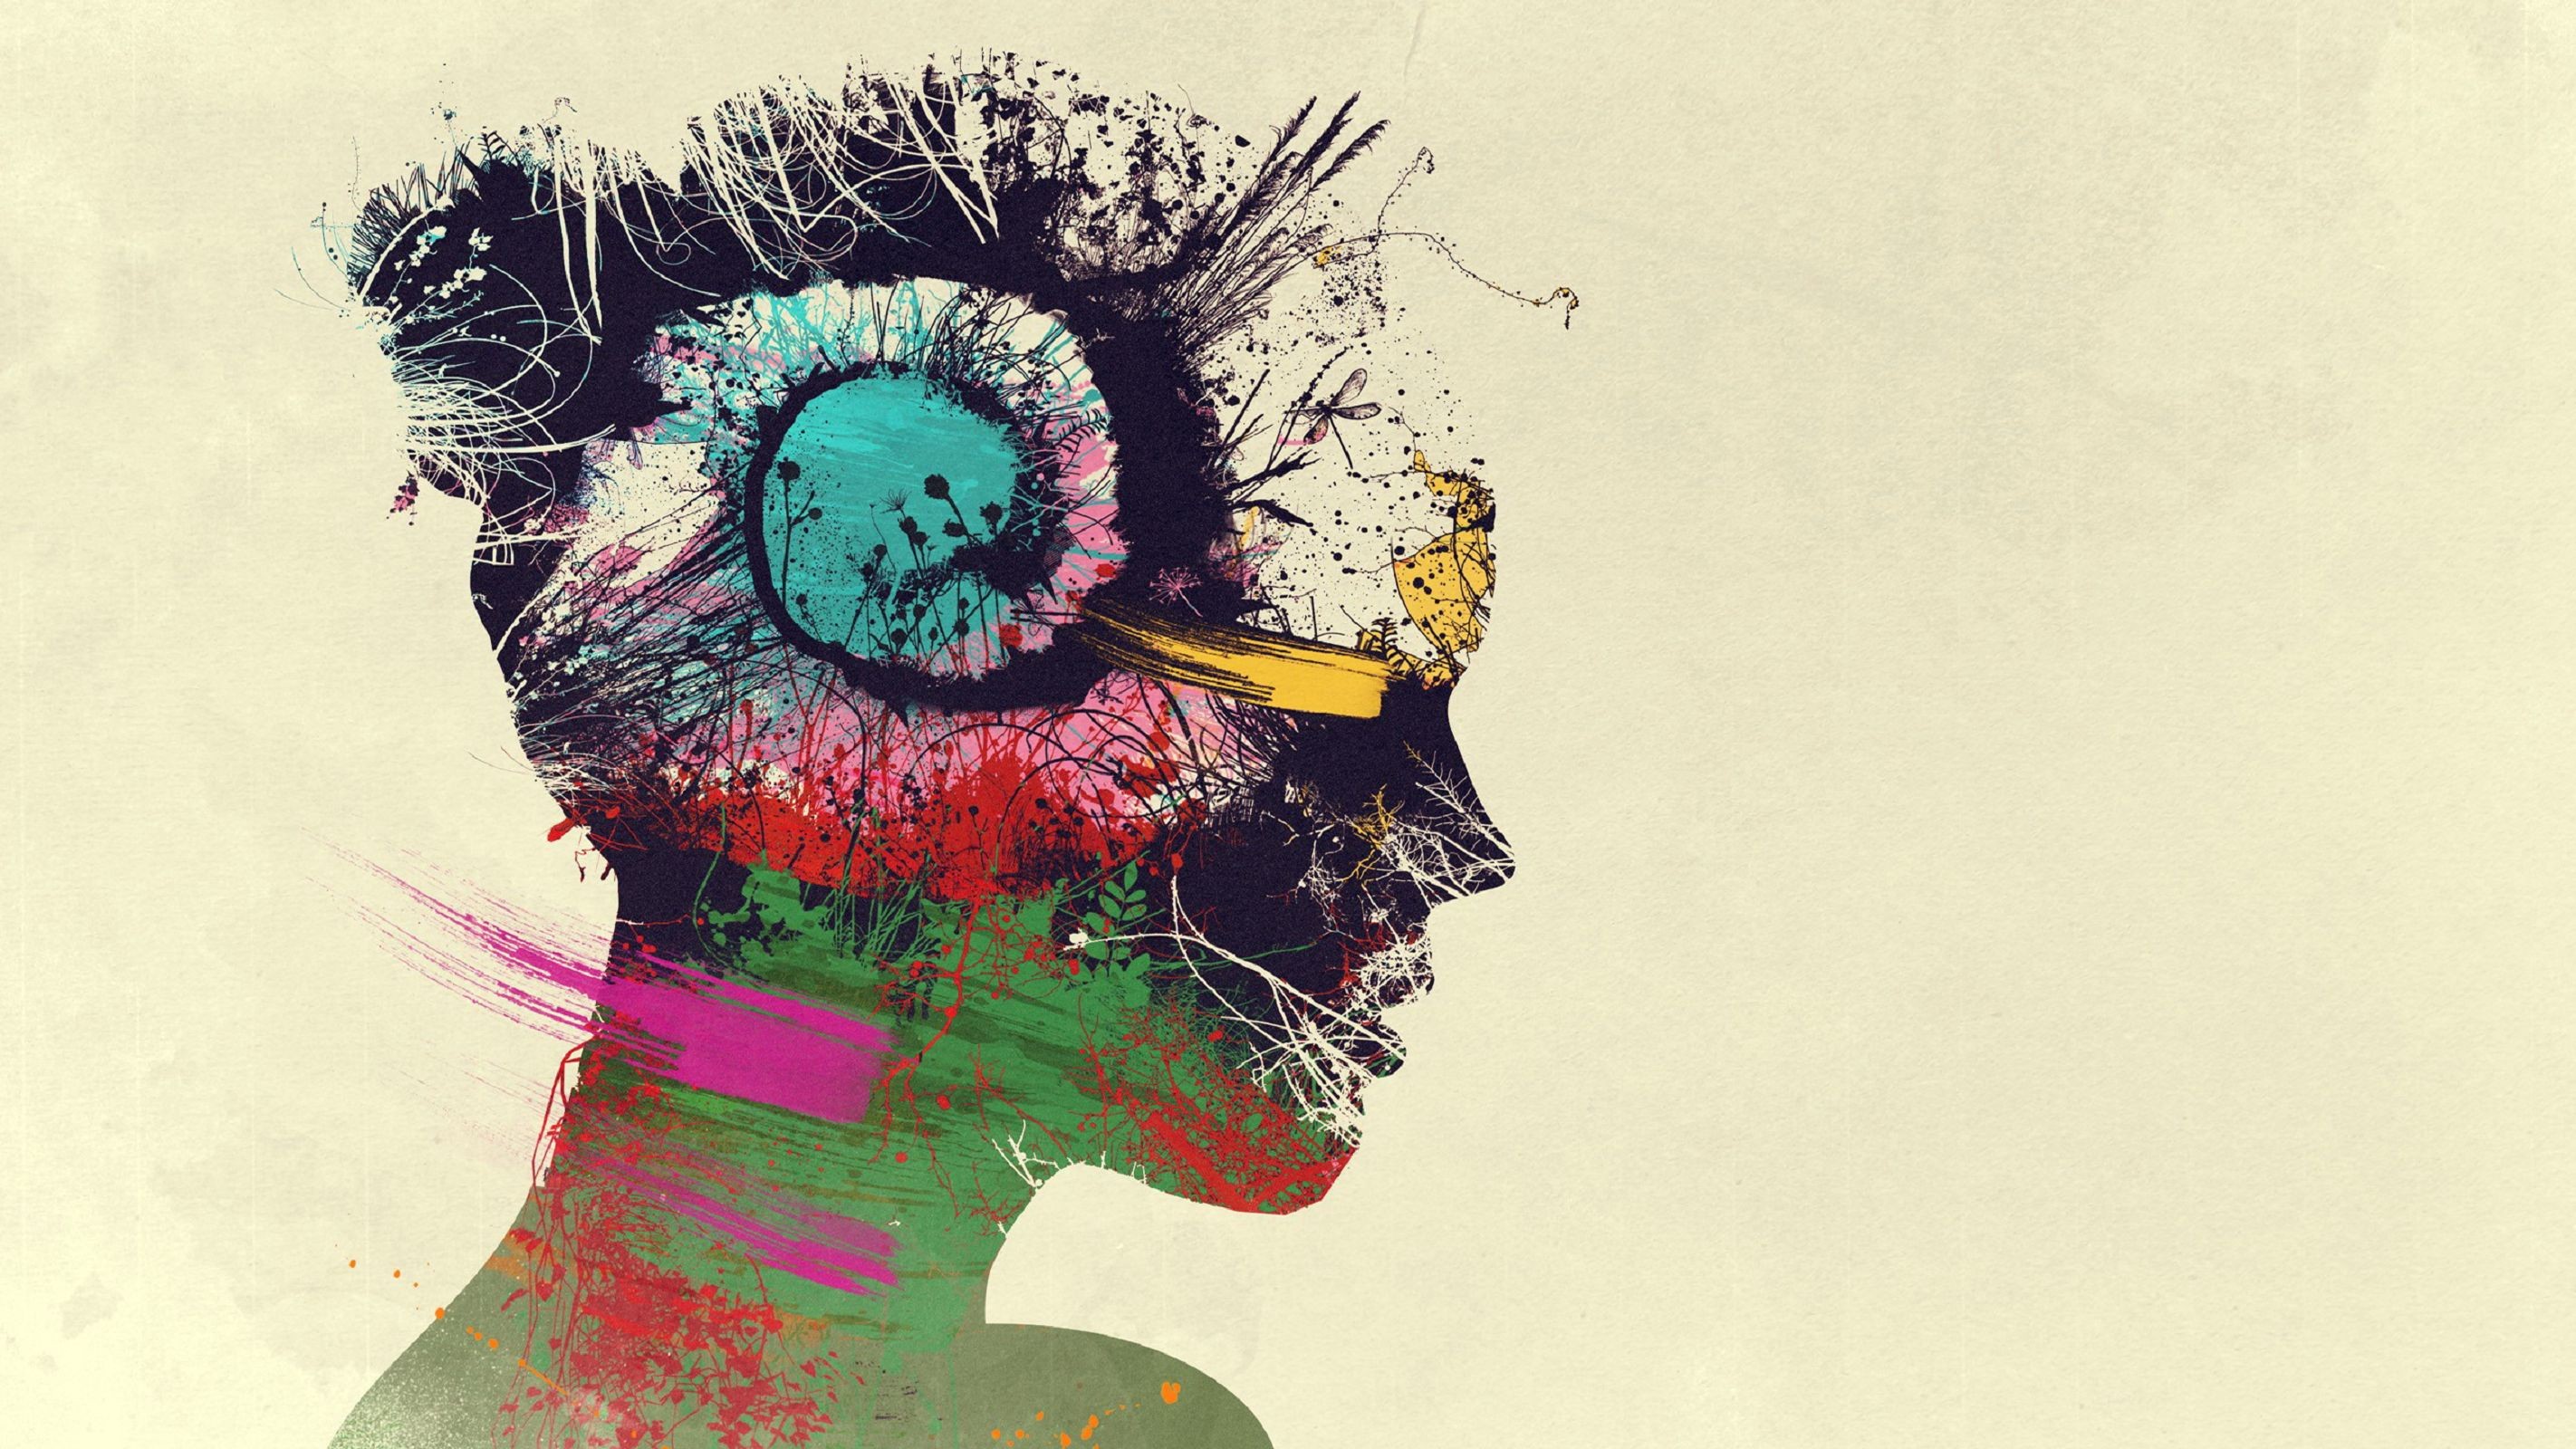 Psychedelic Mind Simple Background Women Double Exposure Colorful Digital Art 2844x1600